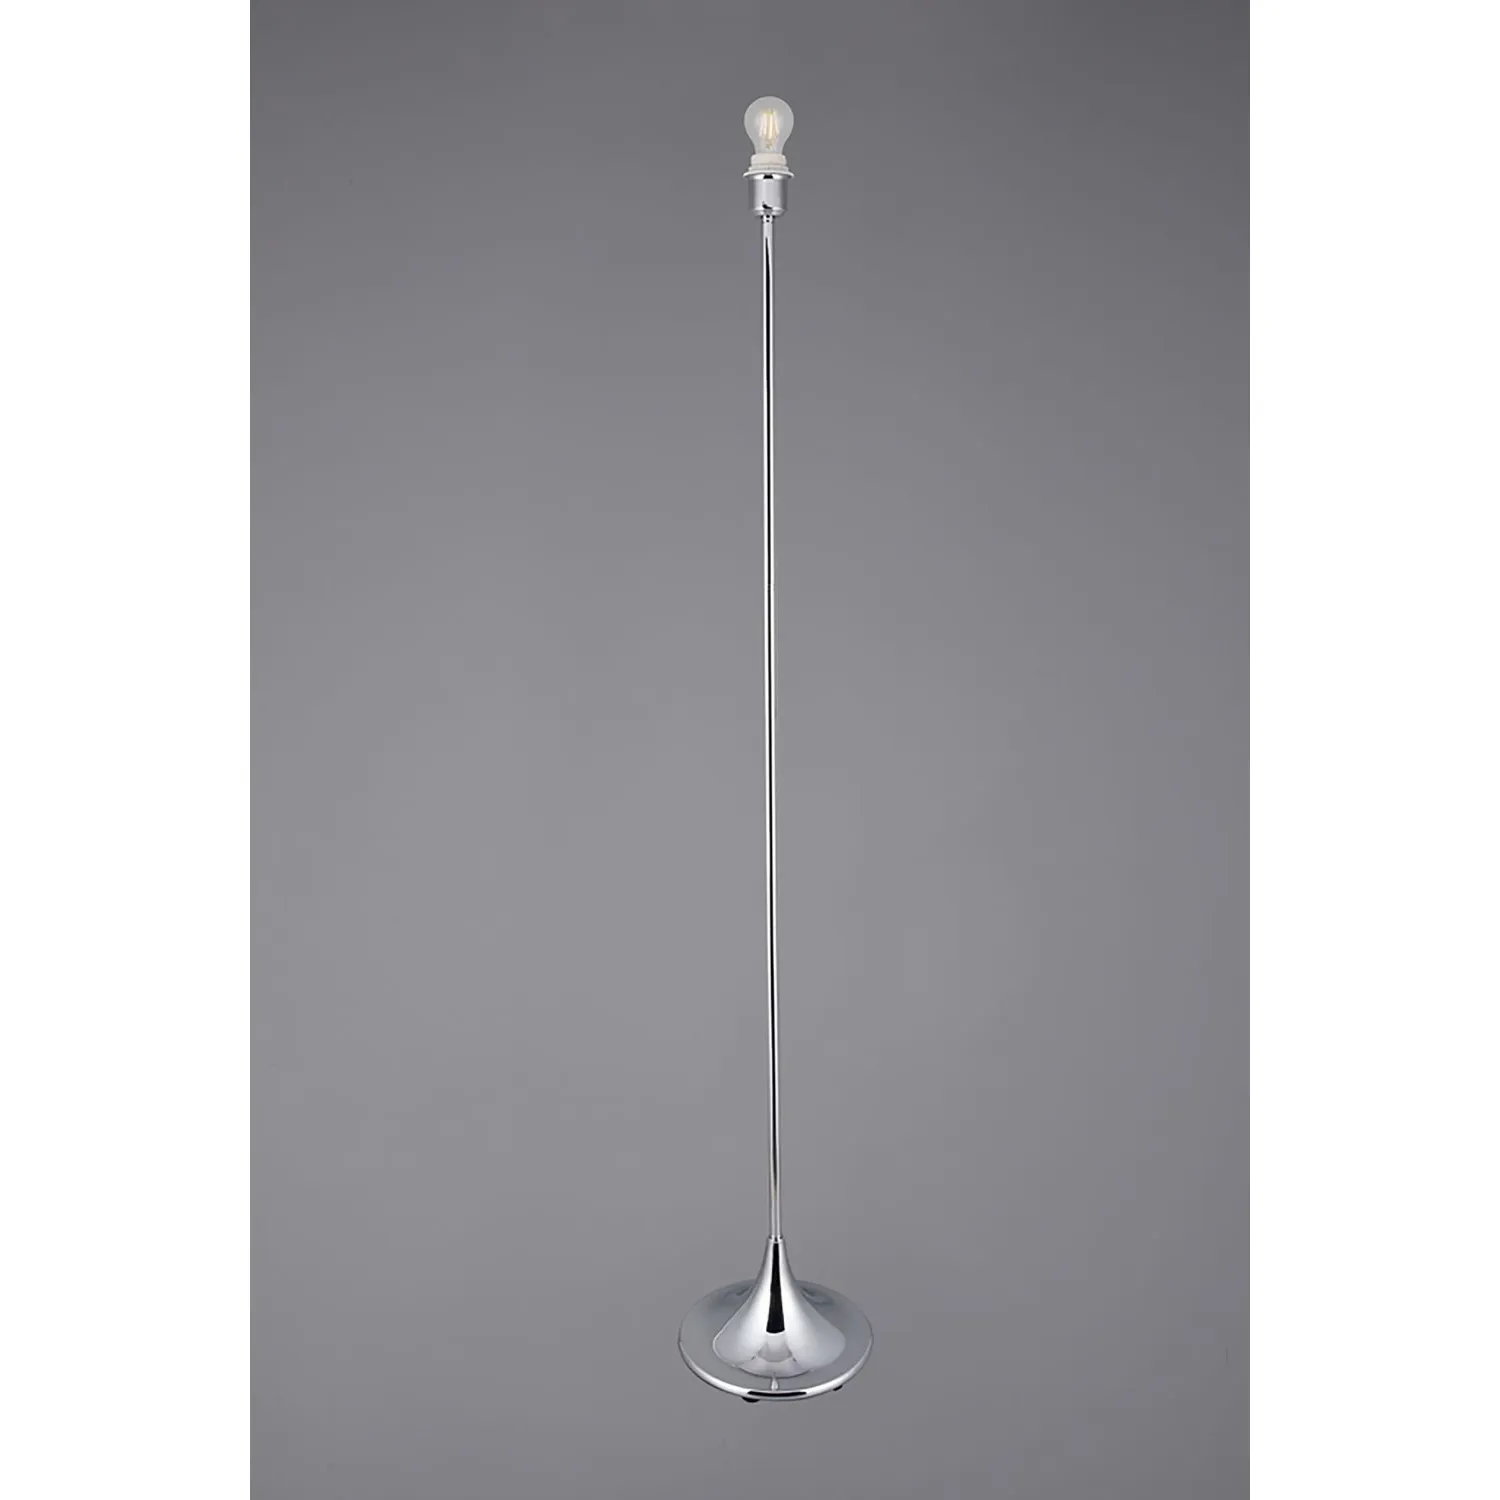 Crowne Round Curved Base Floor Lamp Without Shade, Inline Switch, 1 Light E27 Polished Chrome